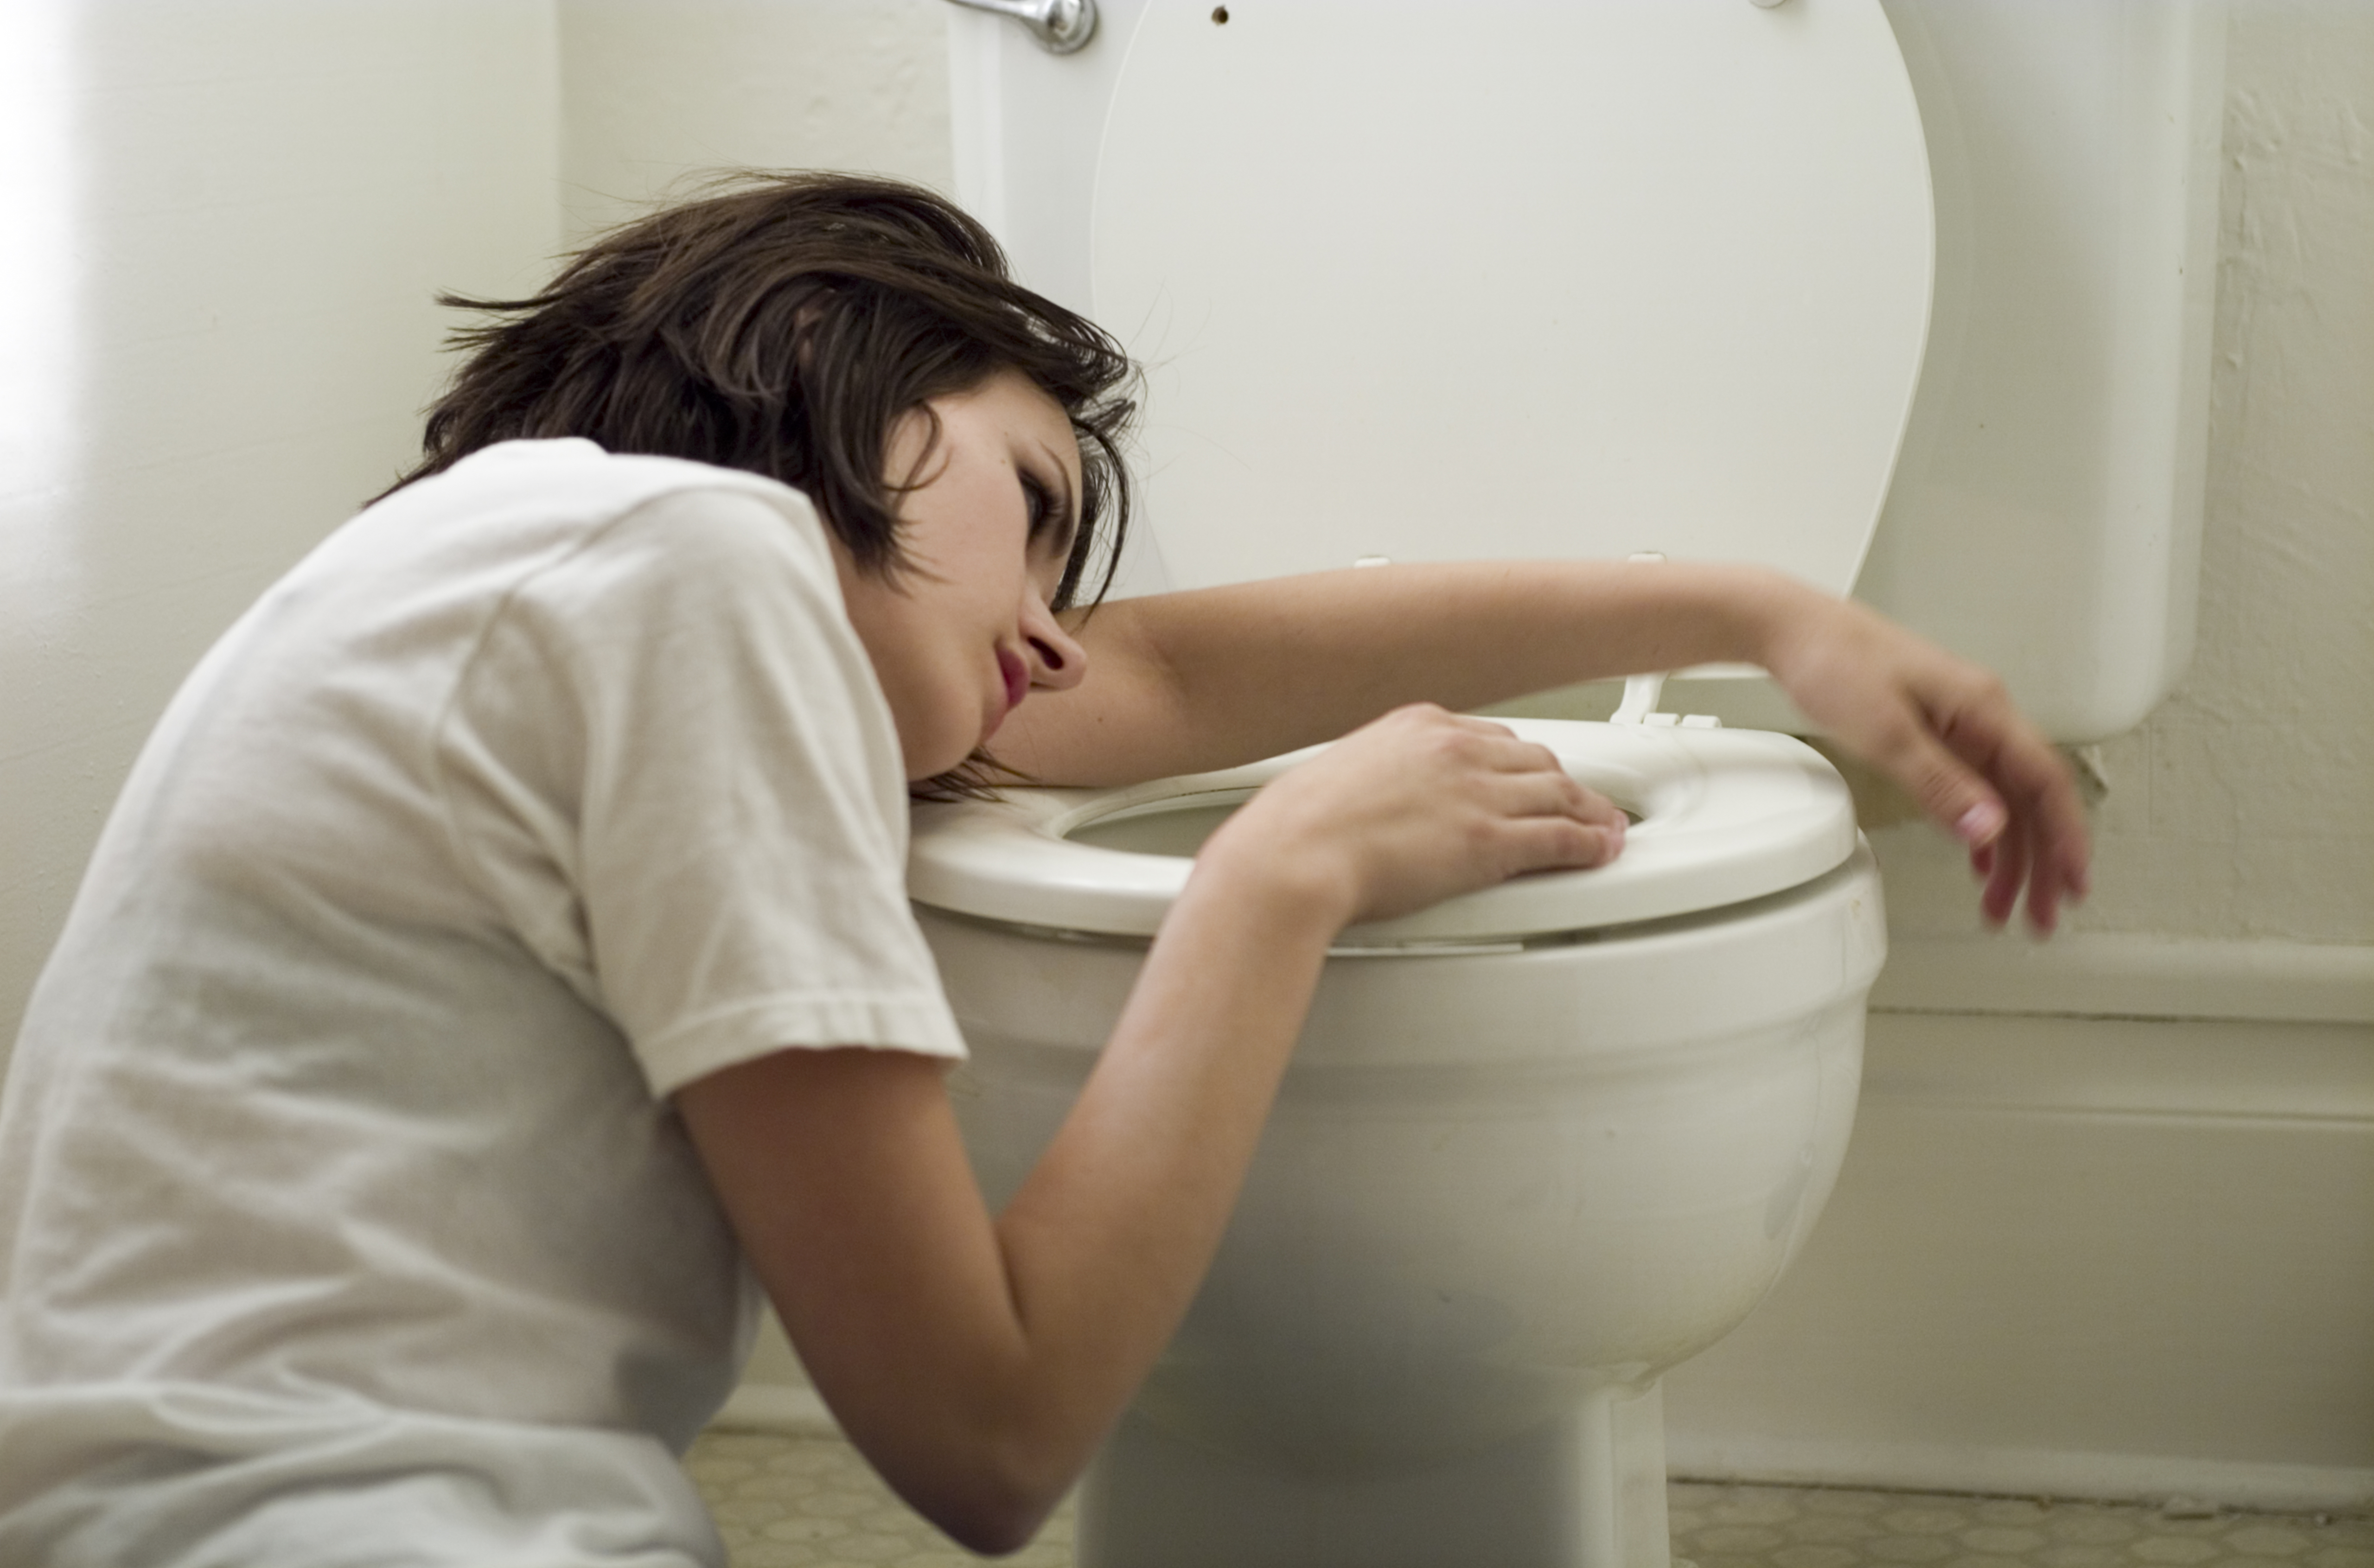 Sick young woman leaning on toilet bowl